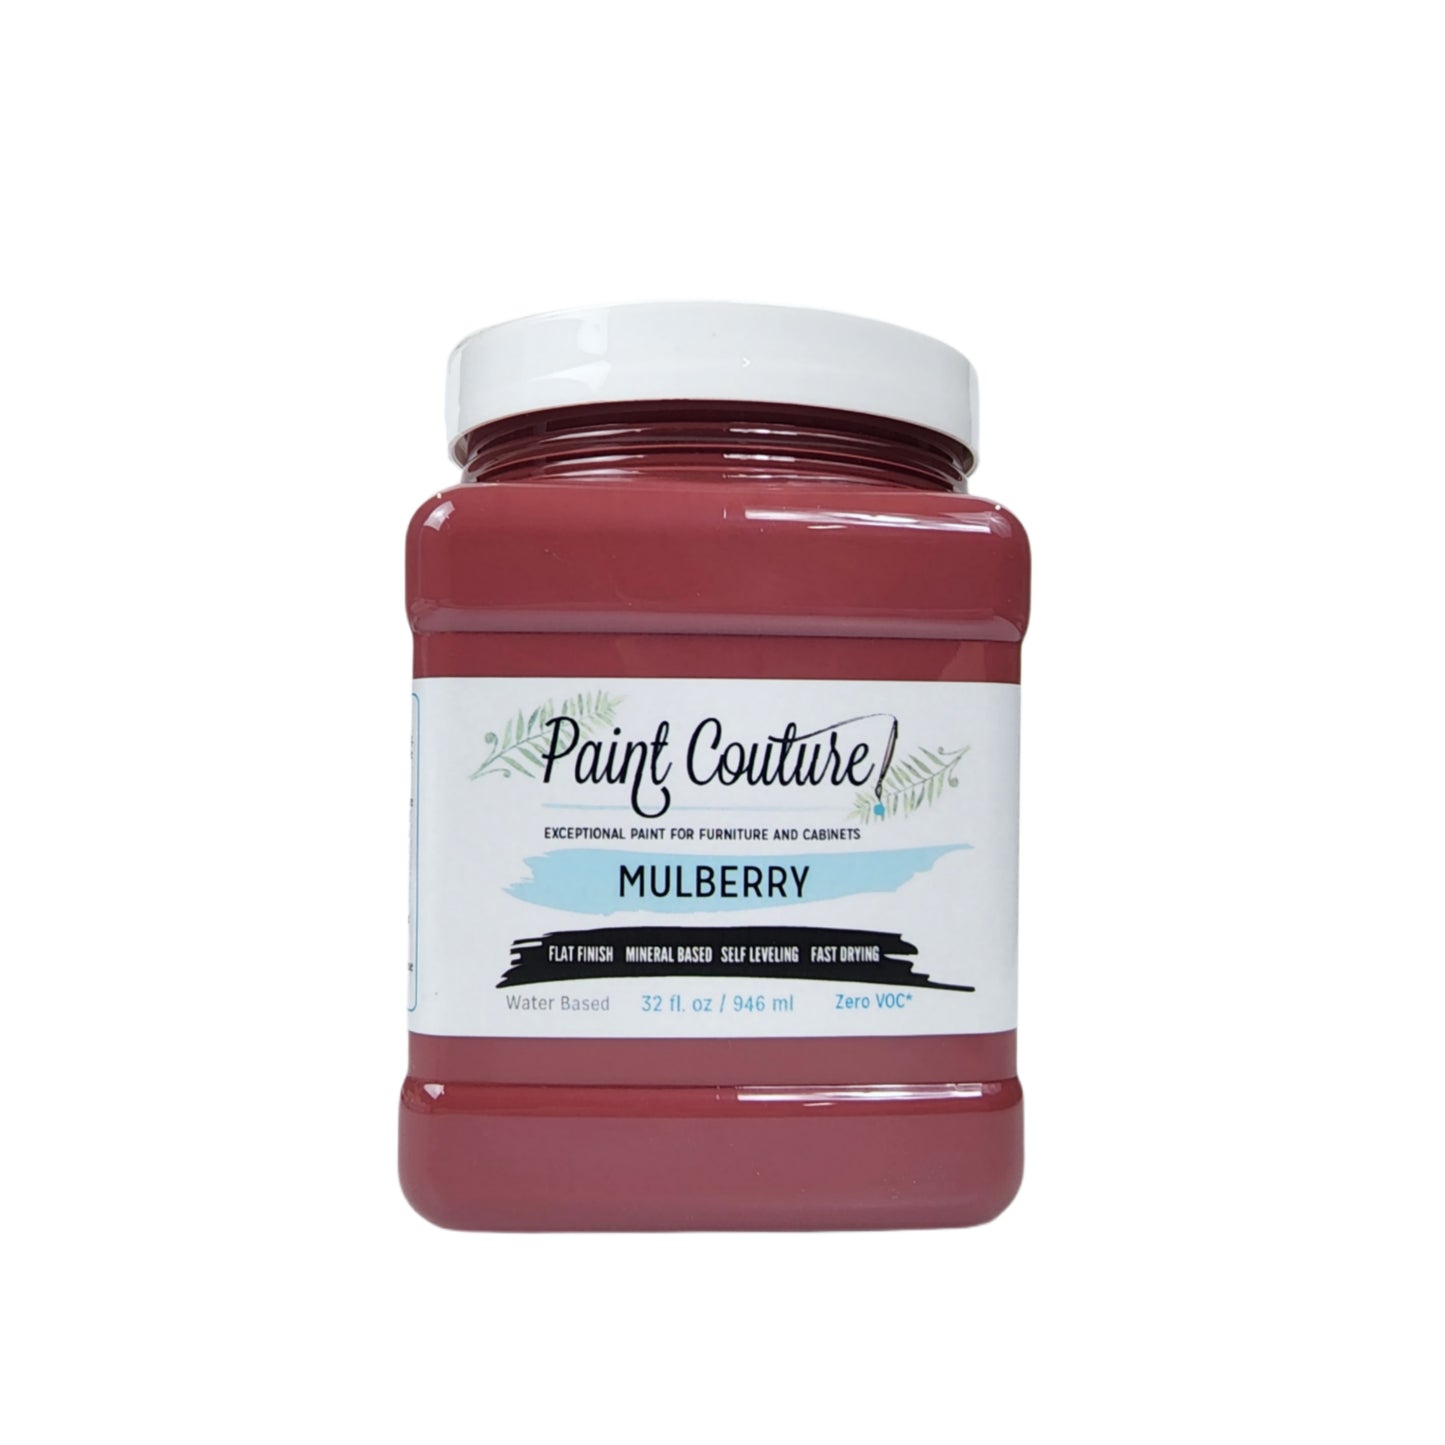 Paint Couture Mulberry